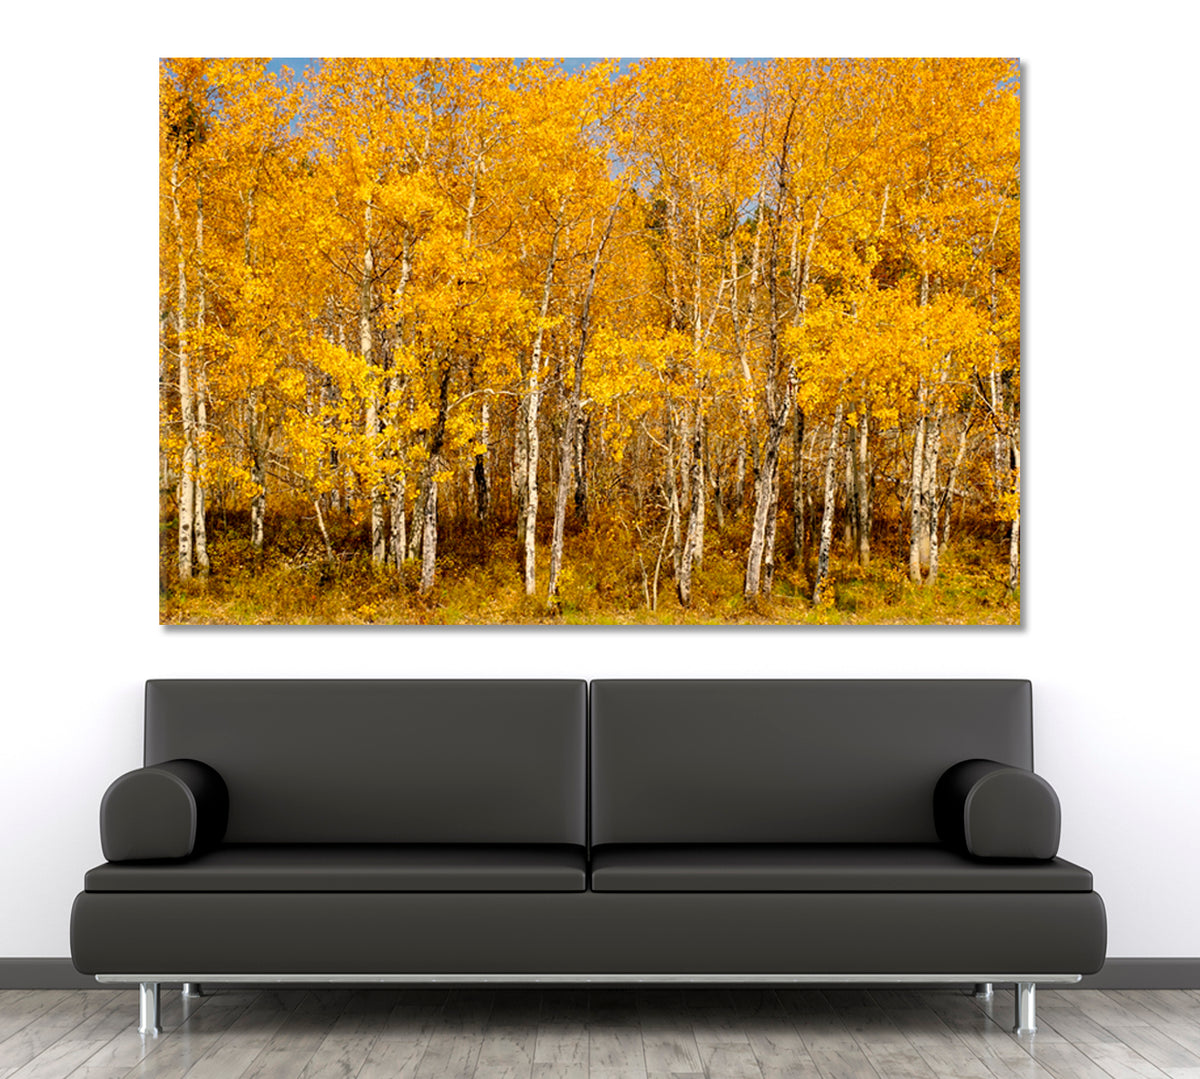 BEAUTIFUL AUTUMN Colorful Stands Of Aspen Trees Nature Wall Canvas Print Artesty 1 panel 24" x 16" 